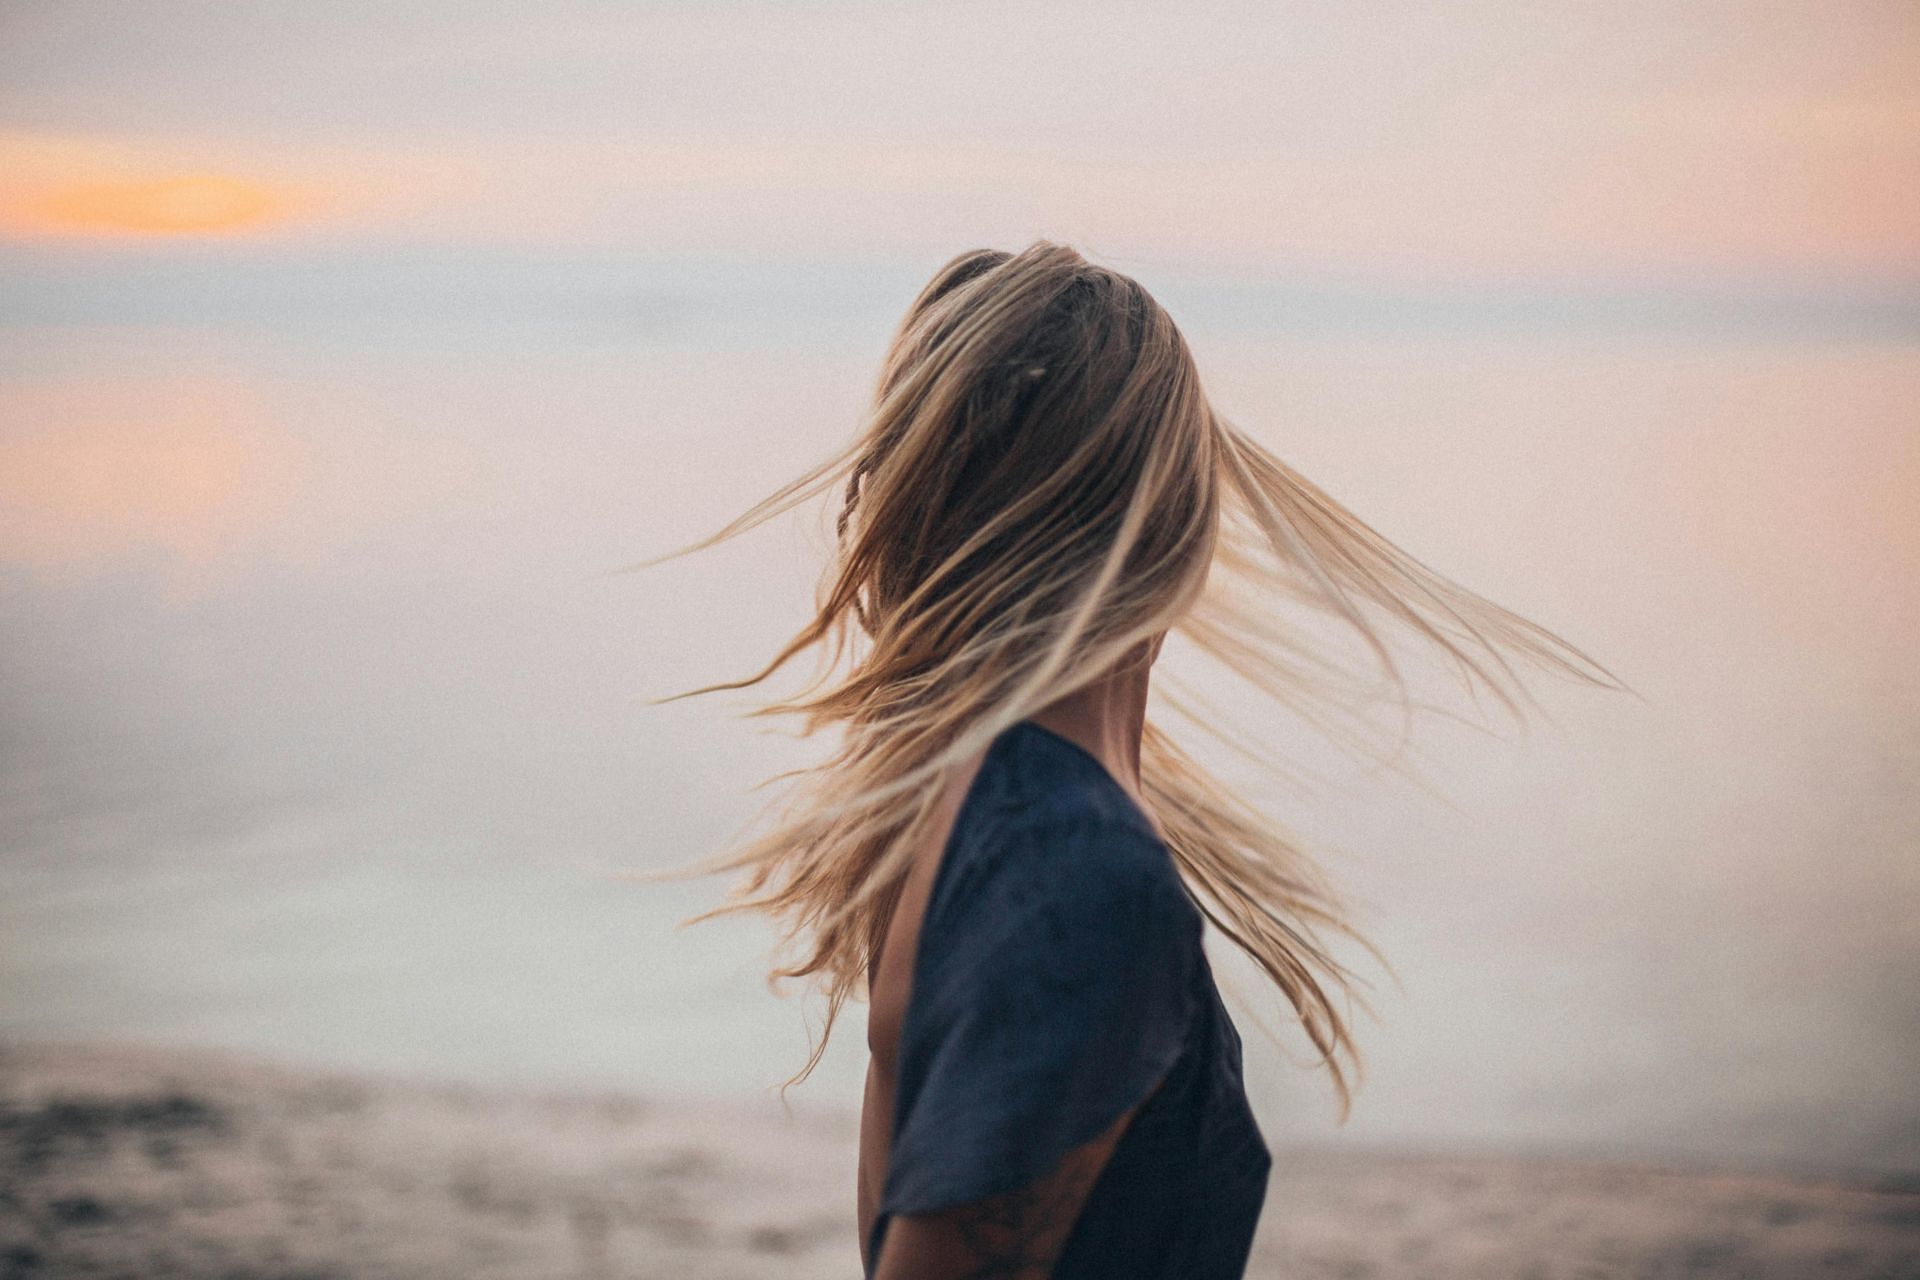 home remedies to treat oily scalp (Image sourced via Pexels / Photo by Elina)